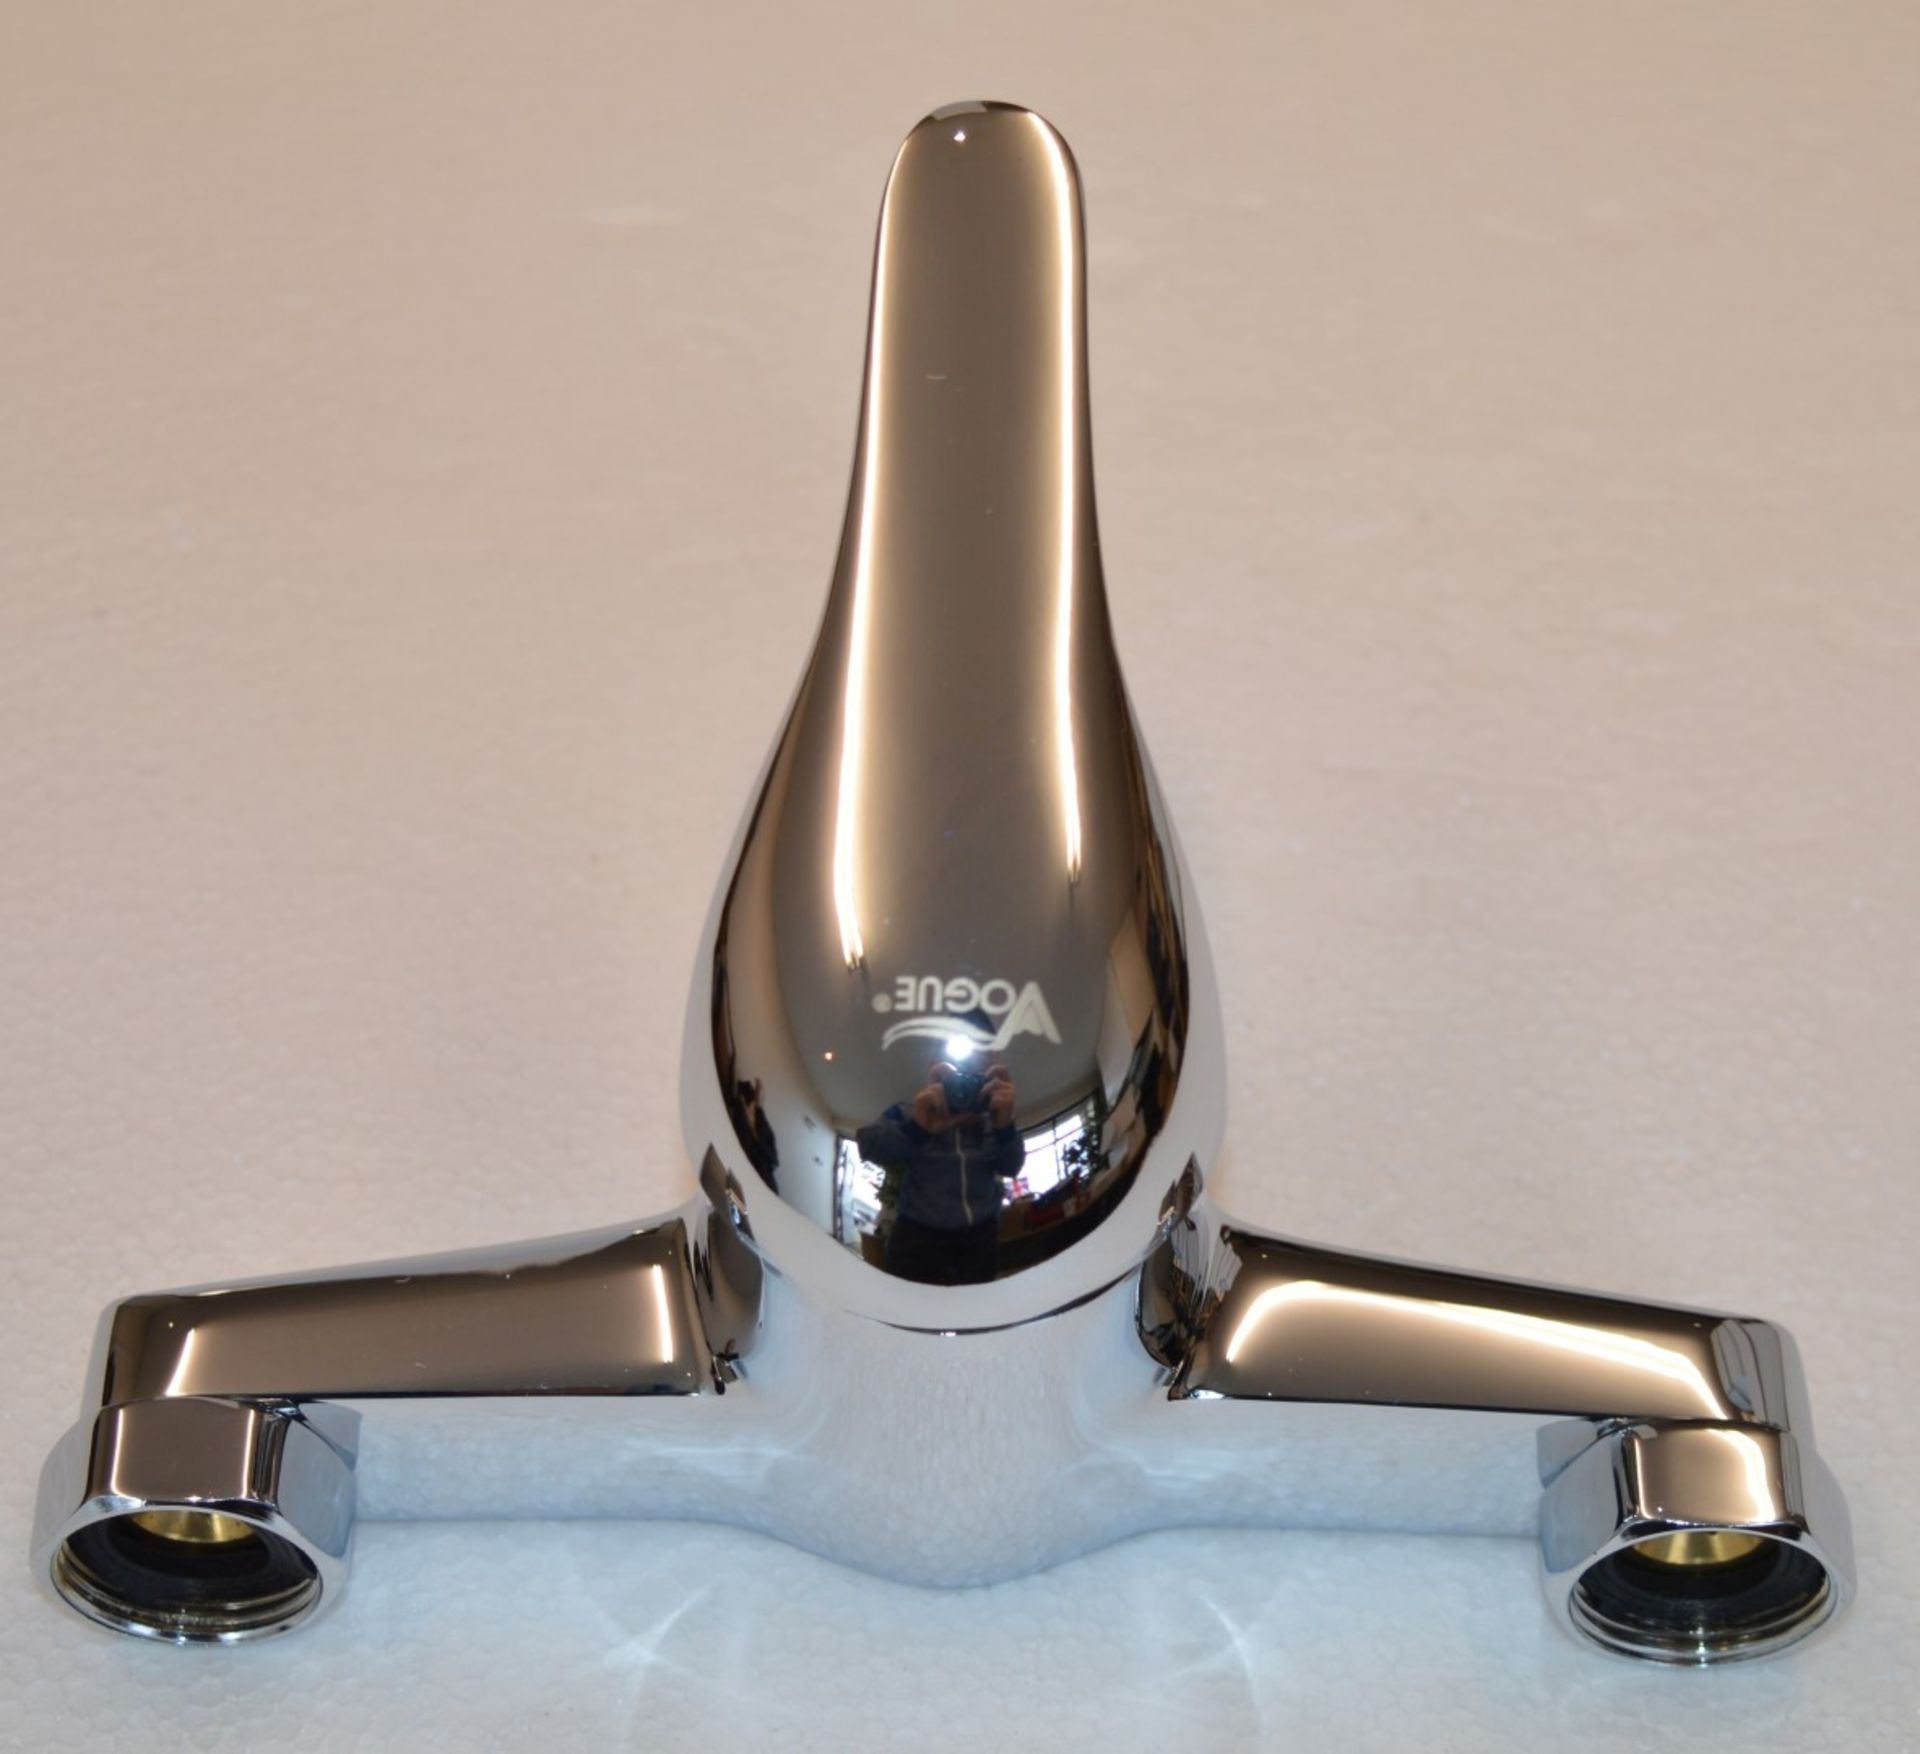 1 x Vogue Carmina Deck Mounted Bath Shower Mixer Tap - Includes Bath Mixer Tap, Shower Head and - Image 8 of 10